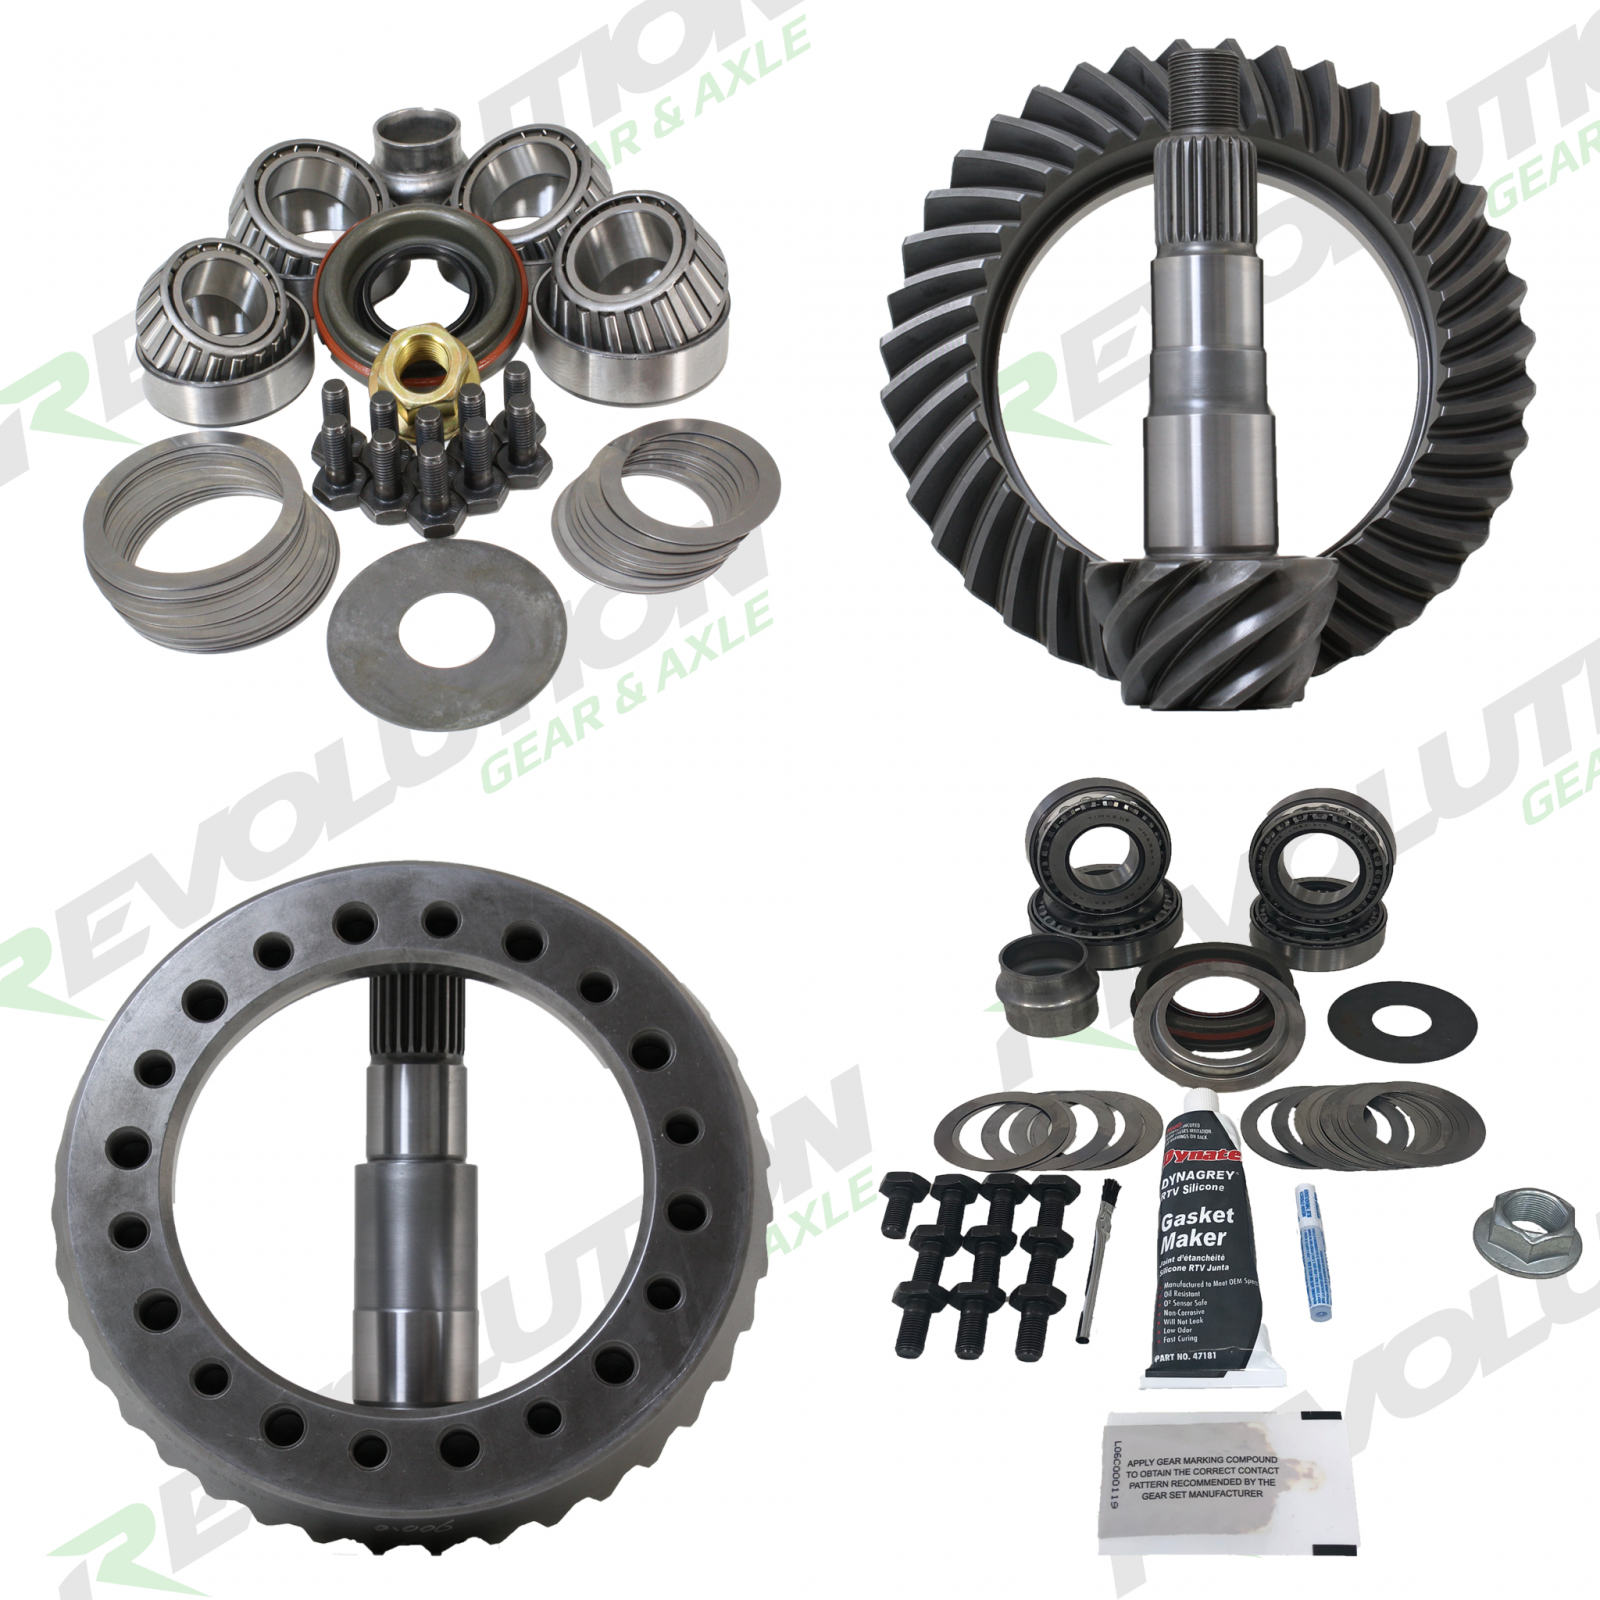 Revolution Gear & Axle Front And Rear Gear Package With Timken Bearings, Chrysler 8.25, Dana 30